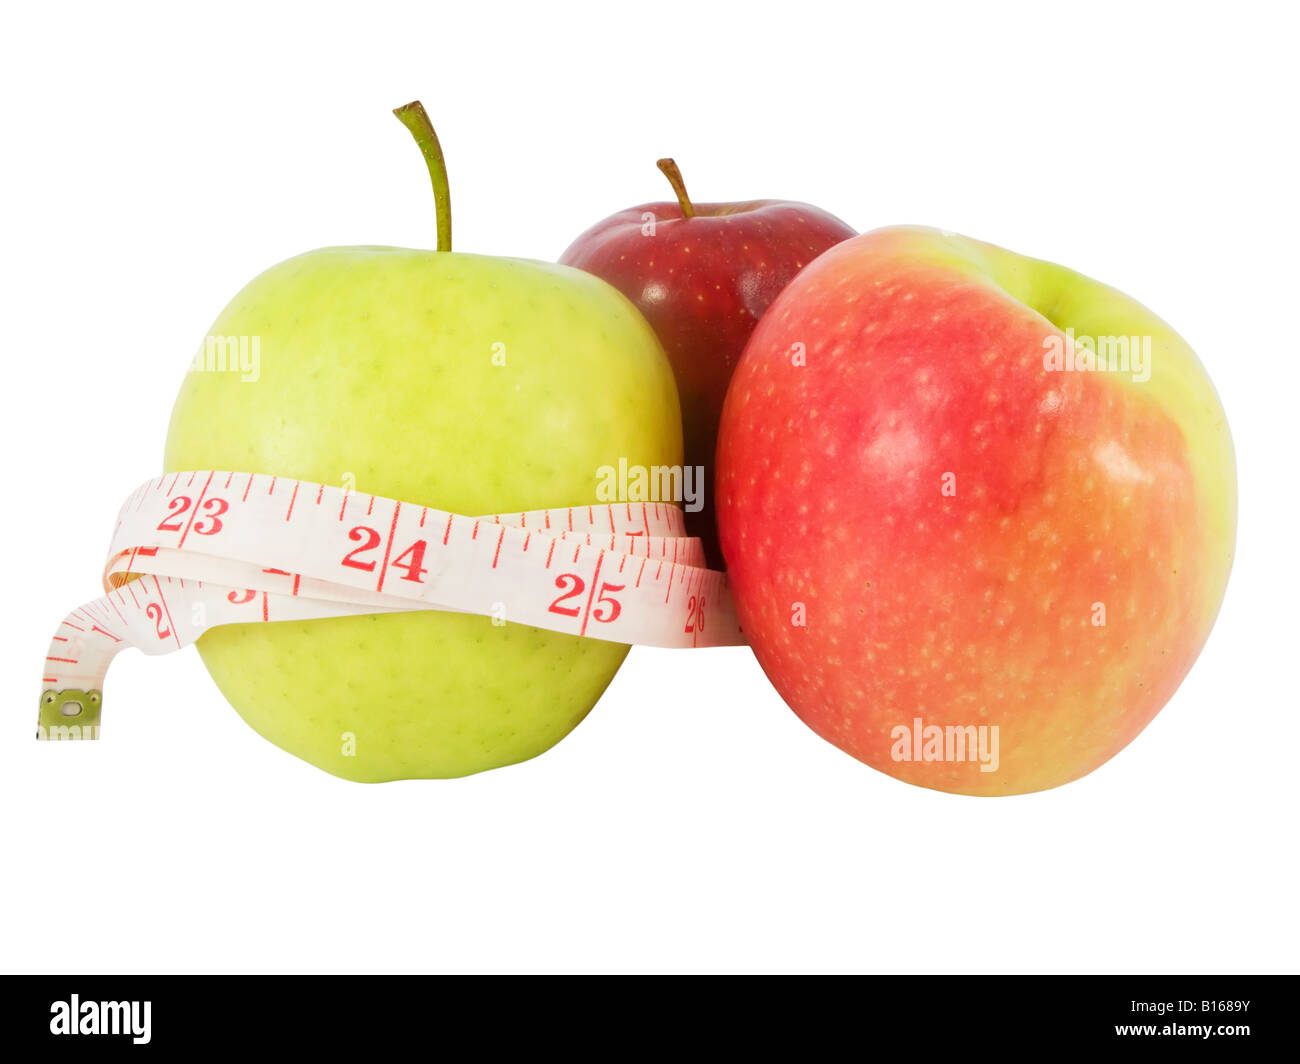 Diet concept with different apples and a measure tape in inches (model waist measure length in tape) Stock Photo